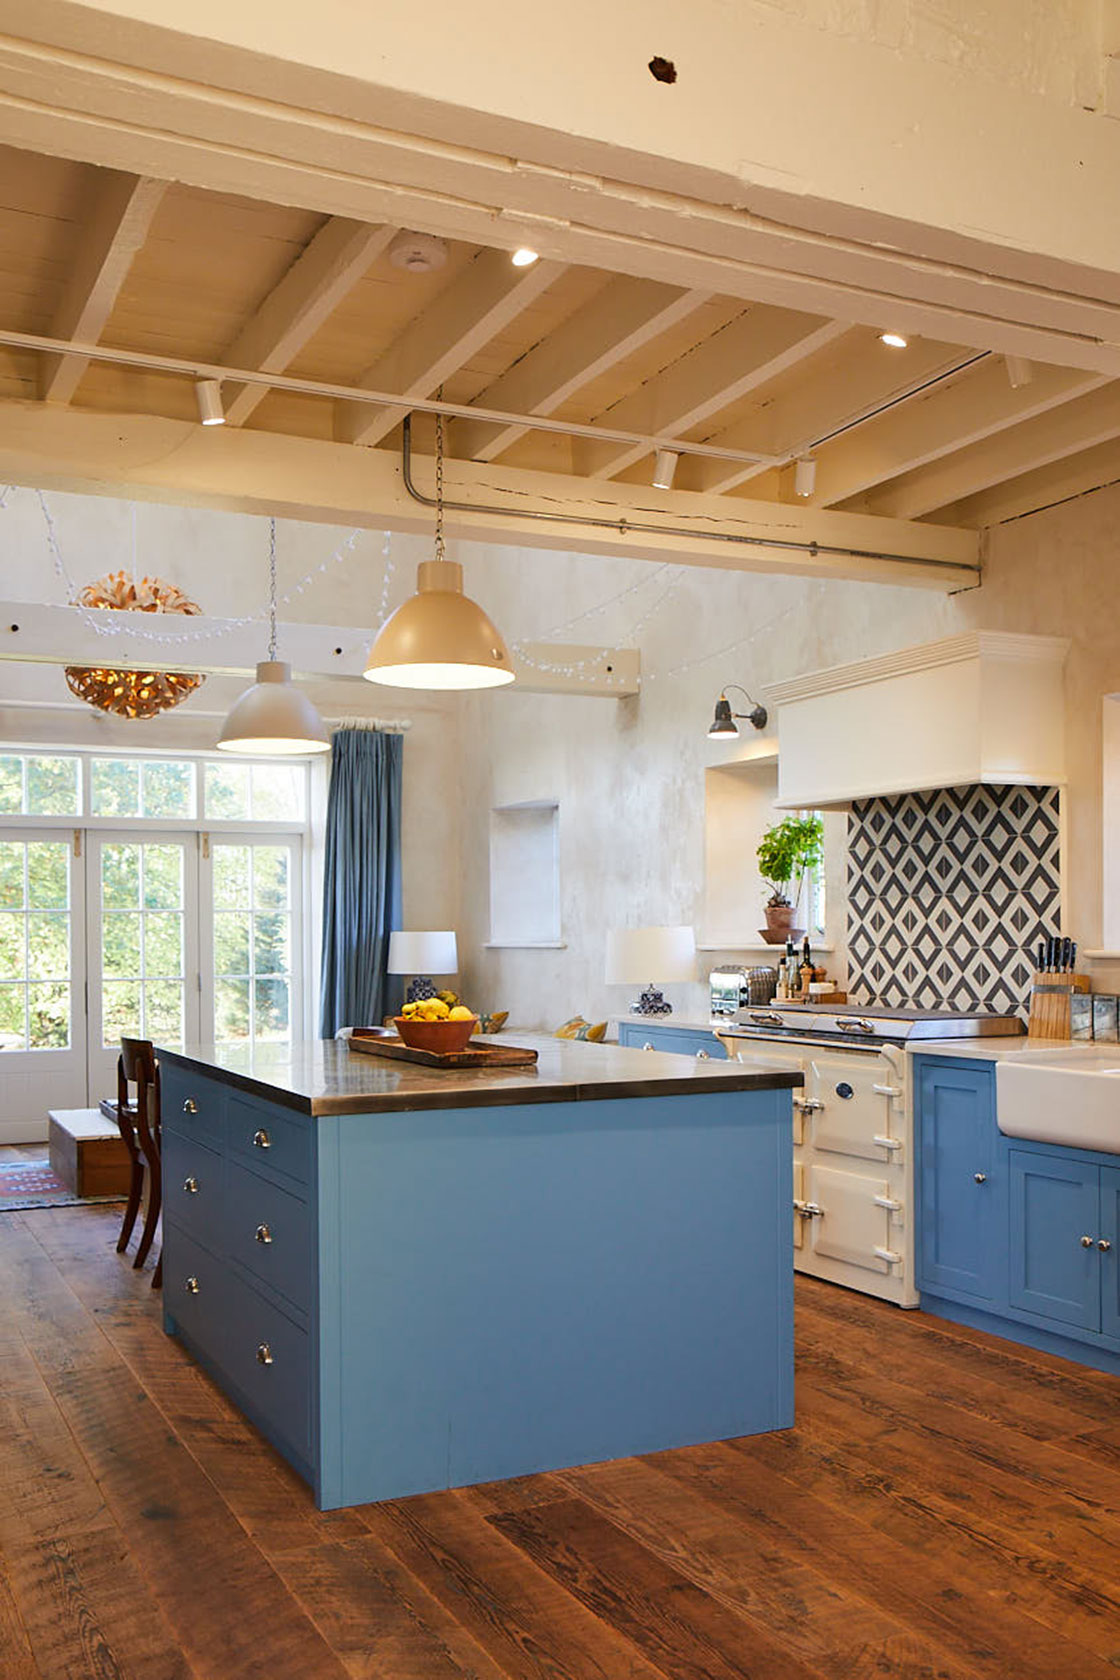 Light blue kitchen island in open plan room with reclaimed pinewood floors